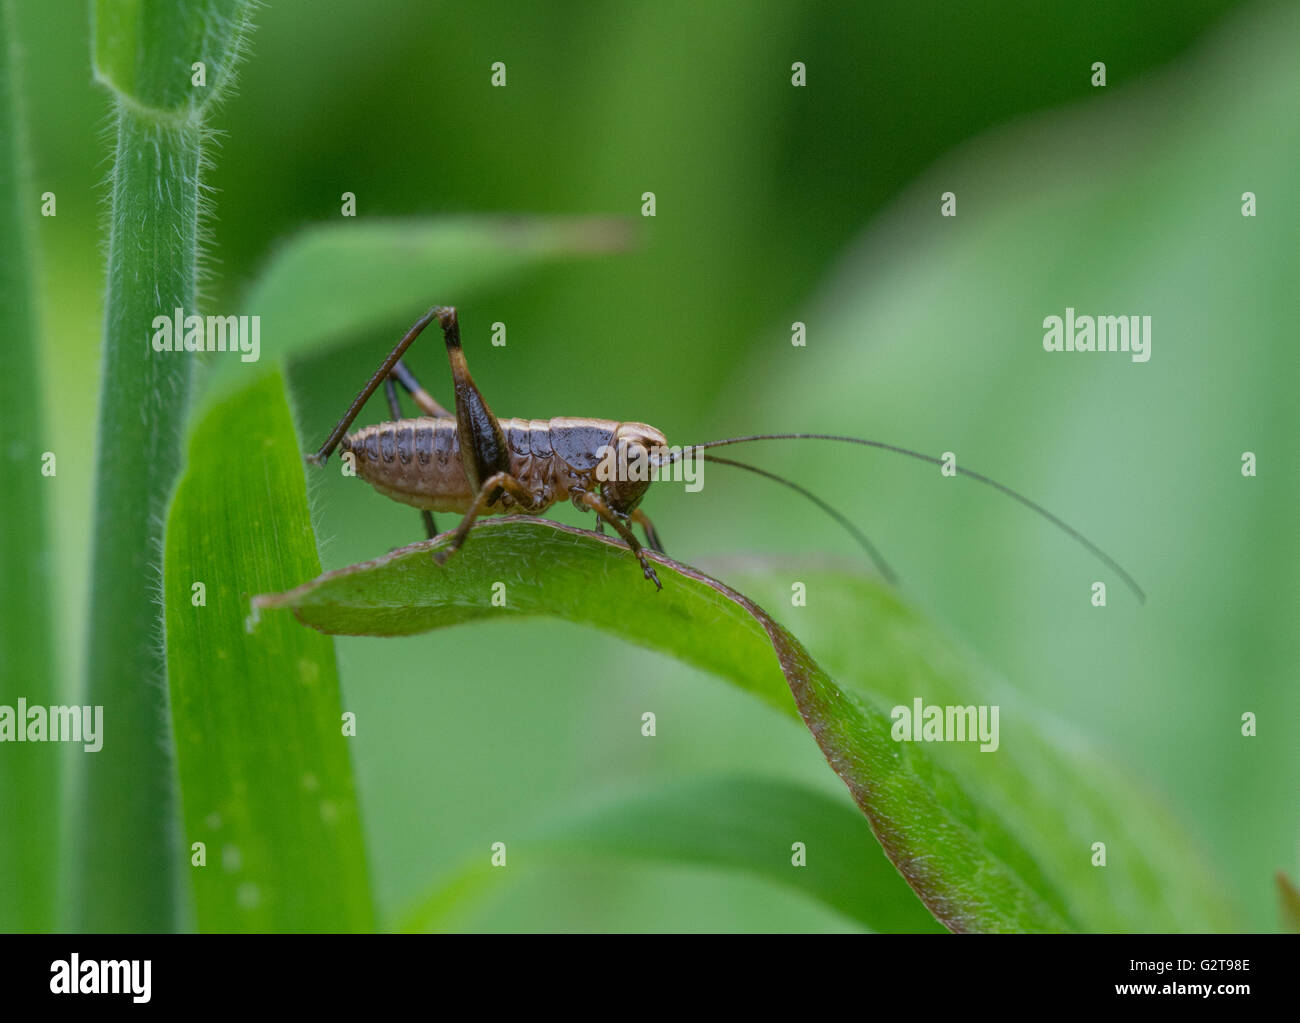 Cricket species with long antennae, England, UK Stock Photo